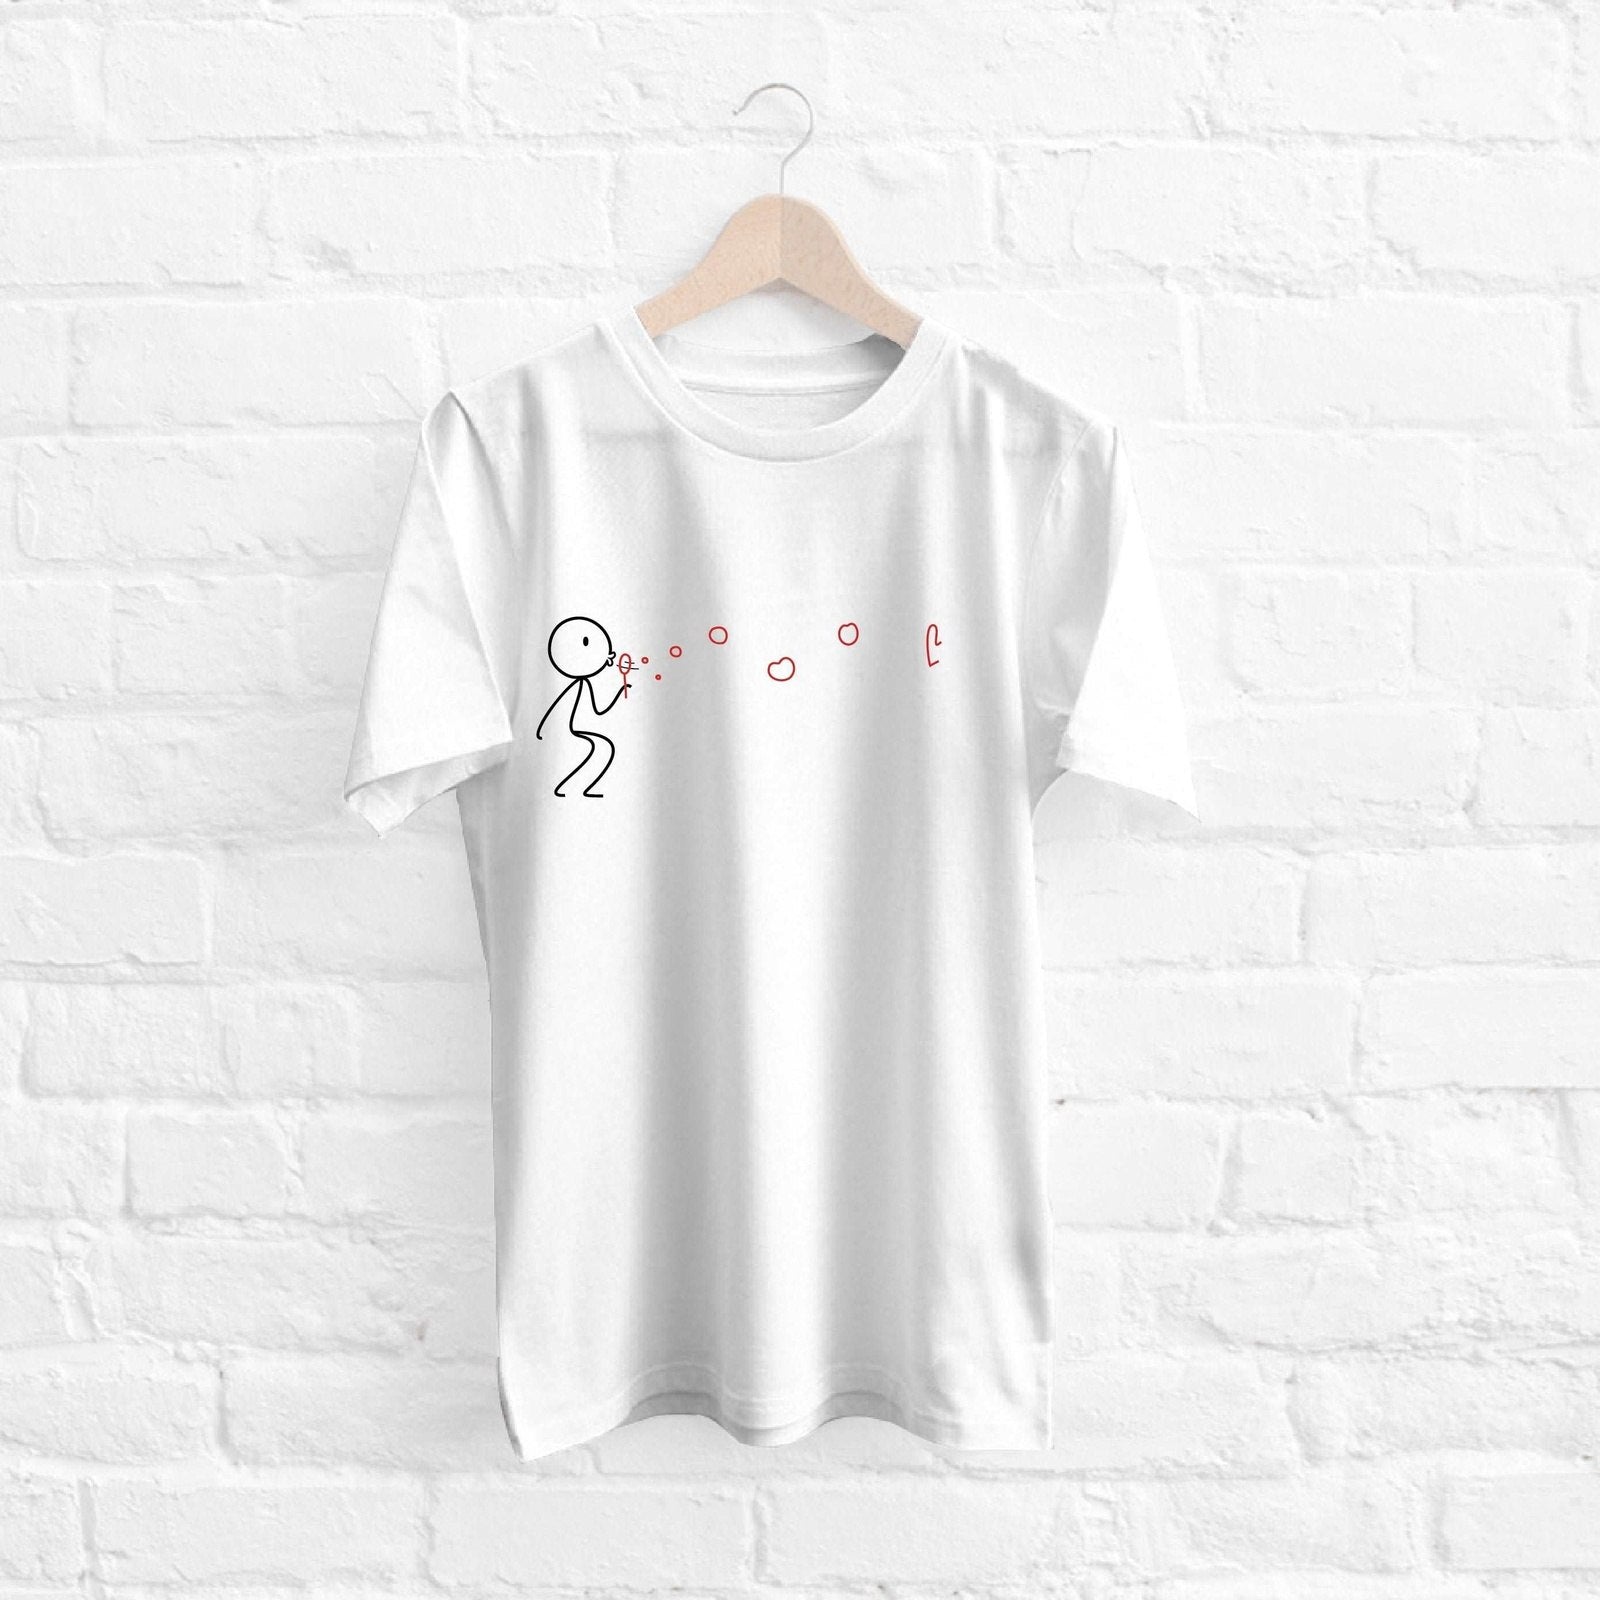 How about this: This adorable white t-shirt features a charming hand-drawn design, perfect for couples, anniversaries, and as a thoughtful gift!